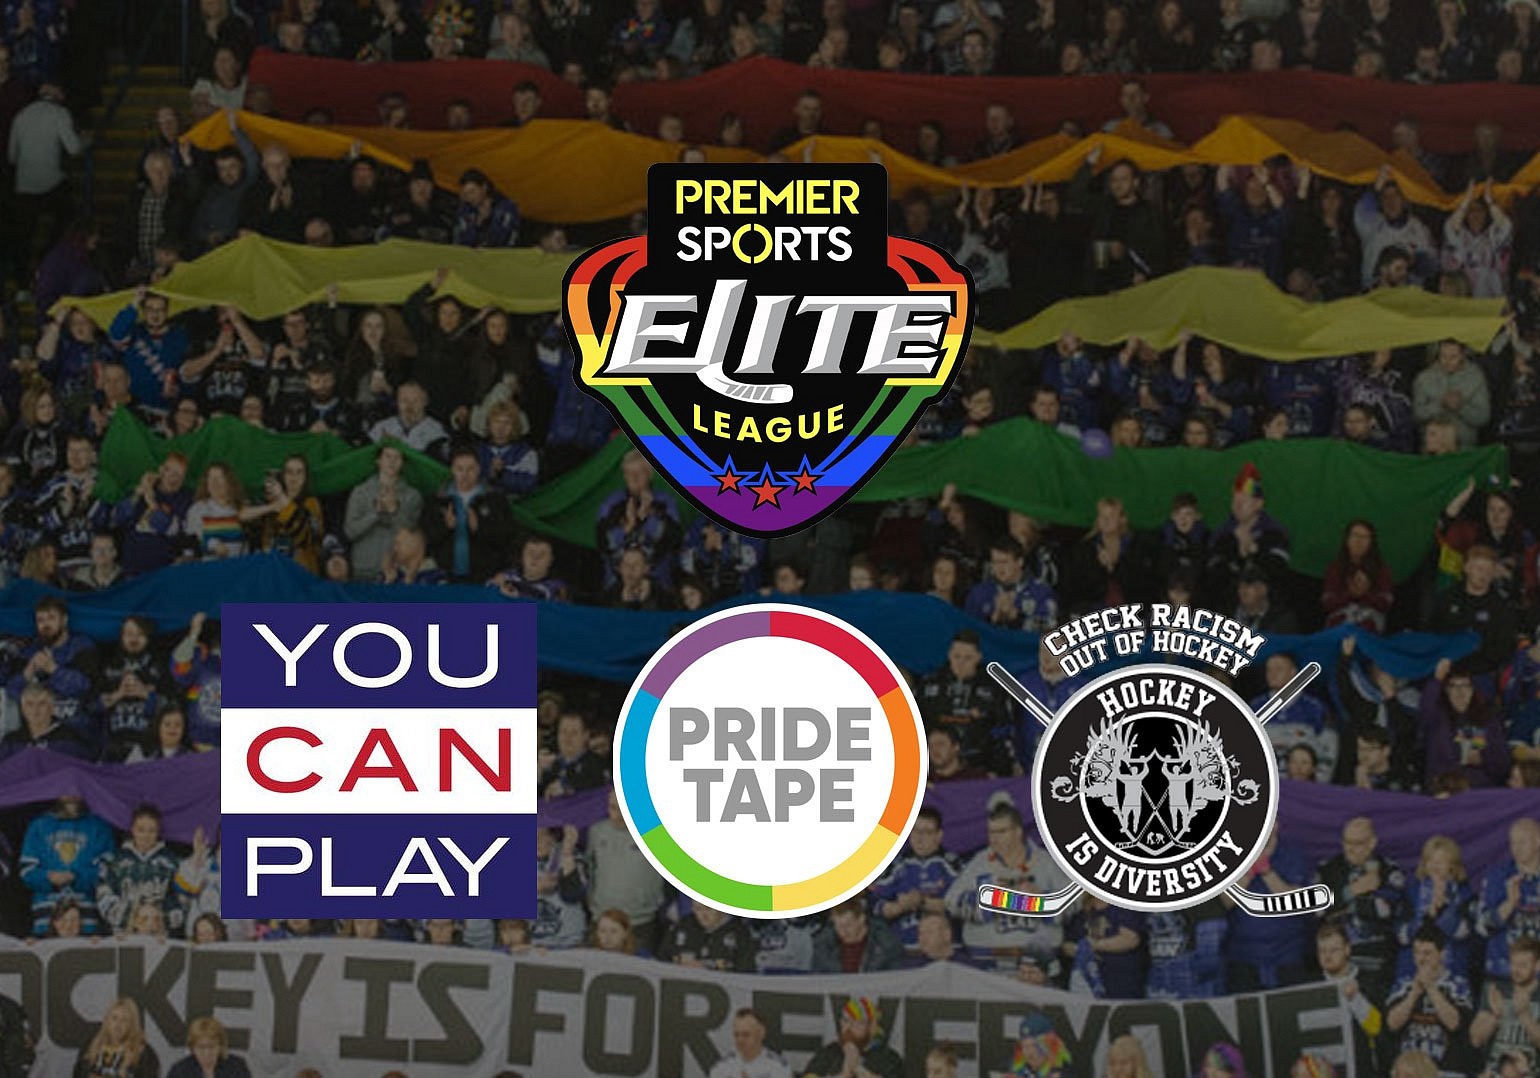 Pride Tape  Sports Tape that promotes Equality and Inclusion through sport